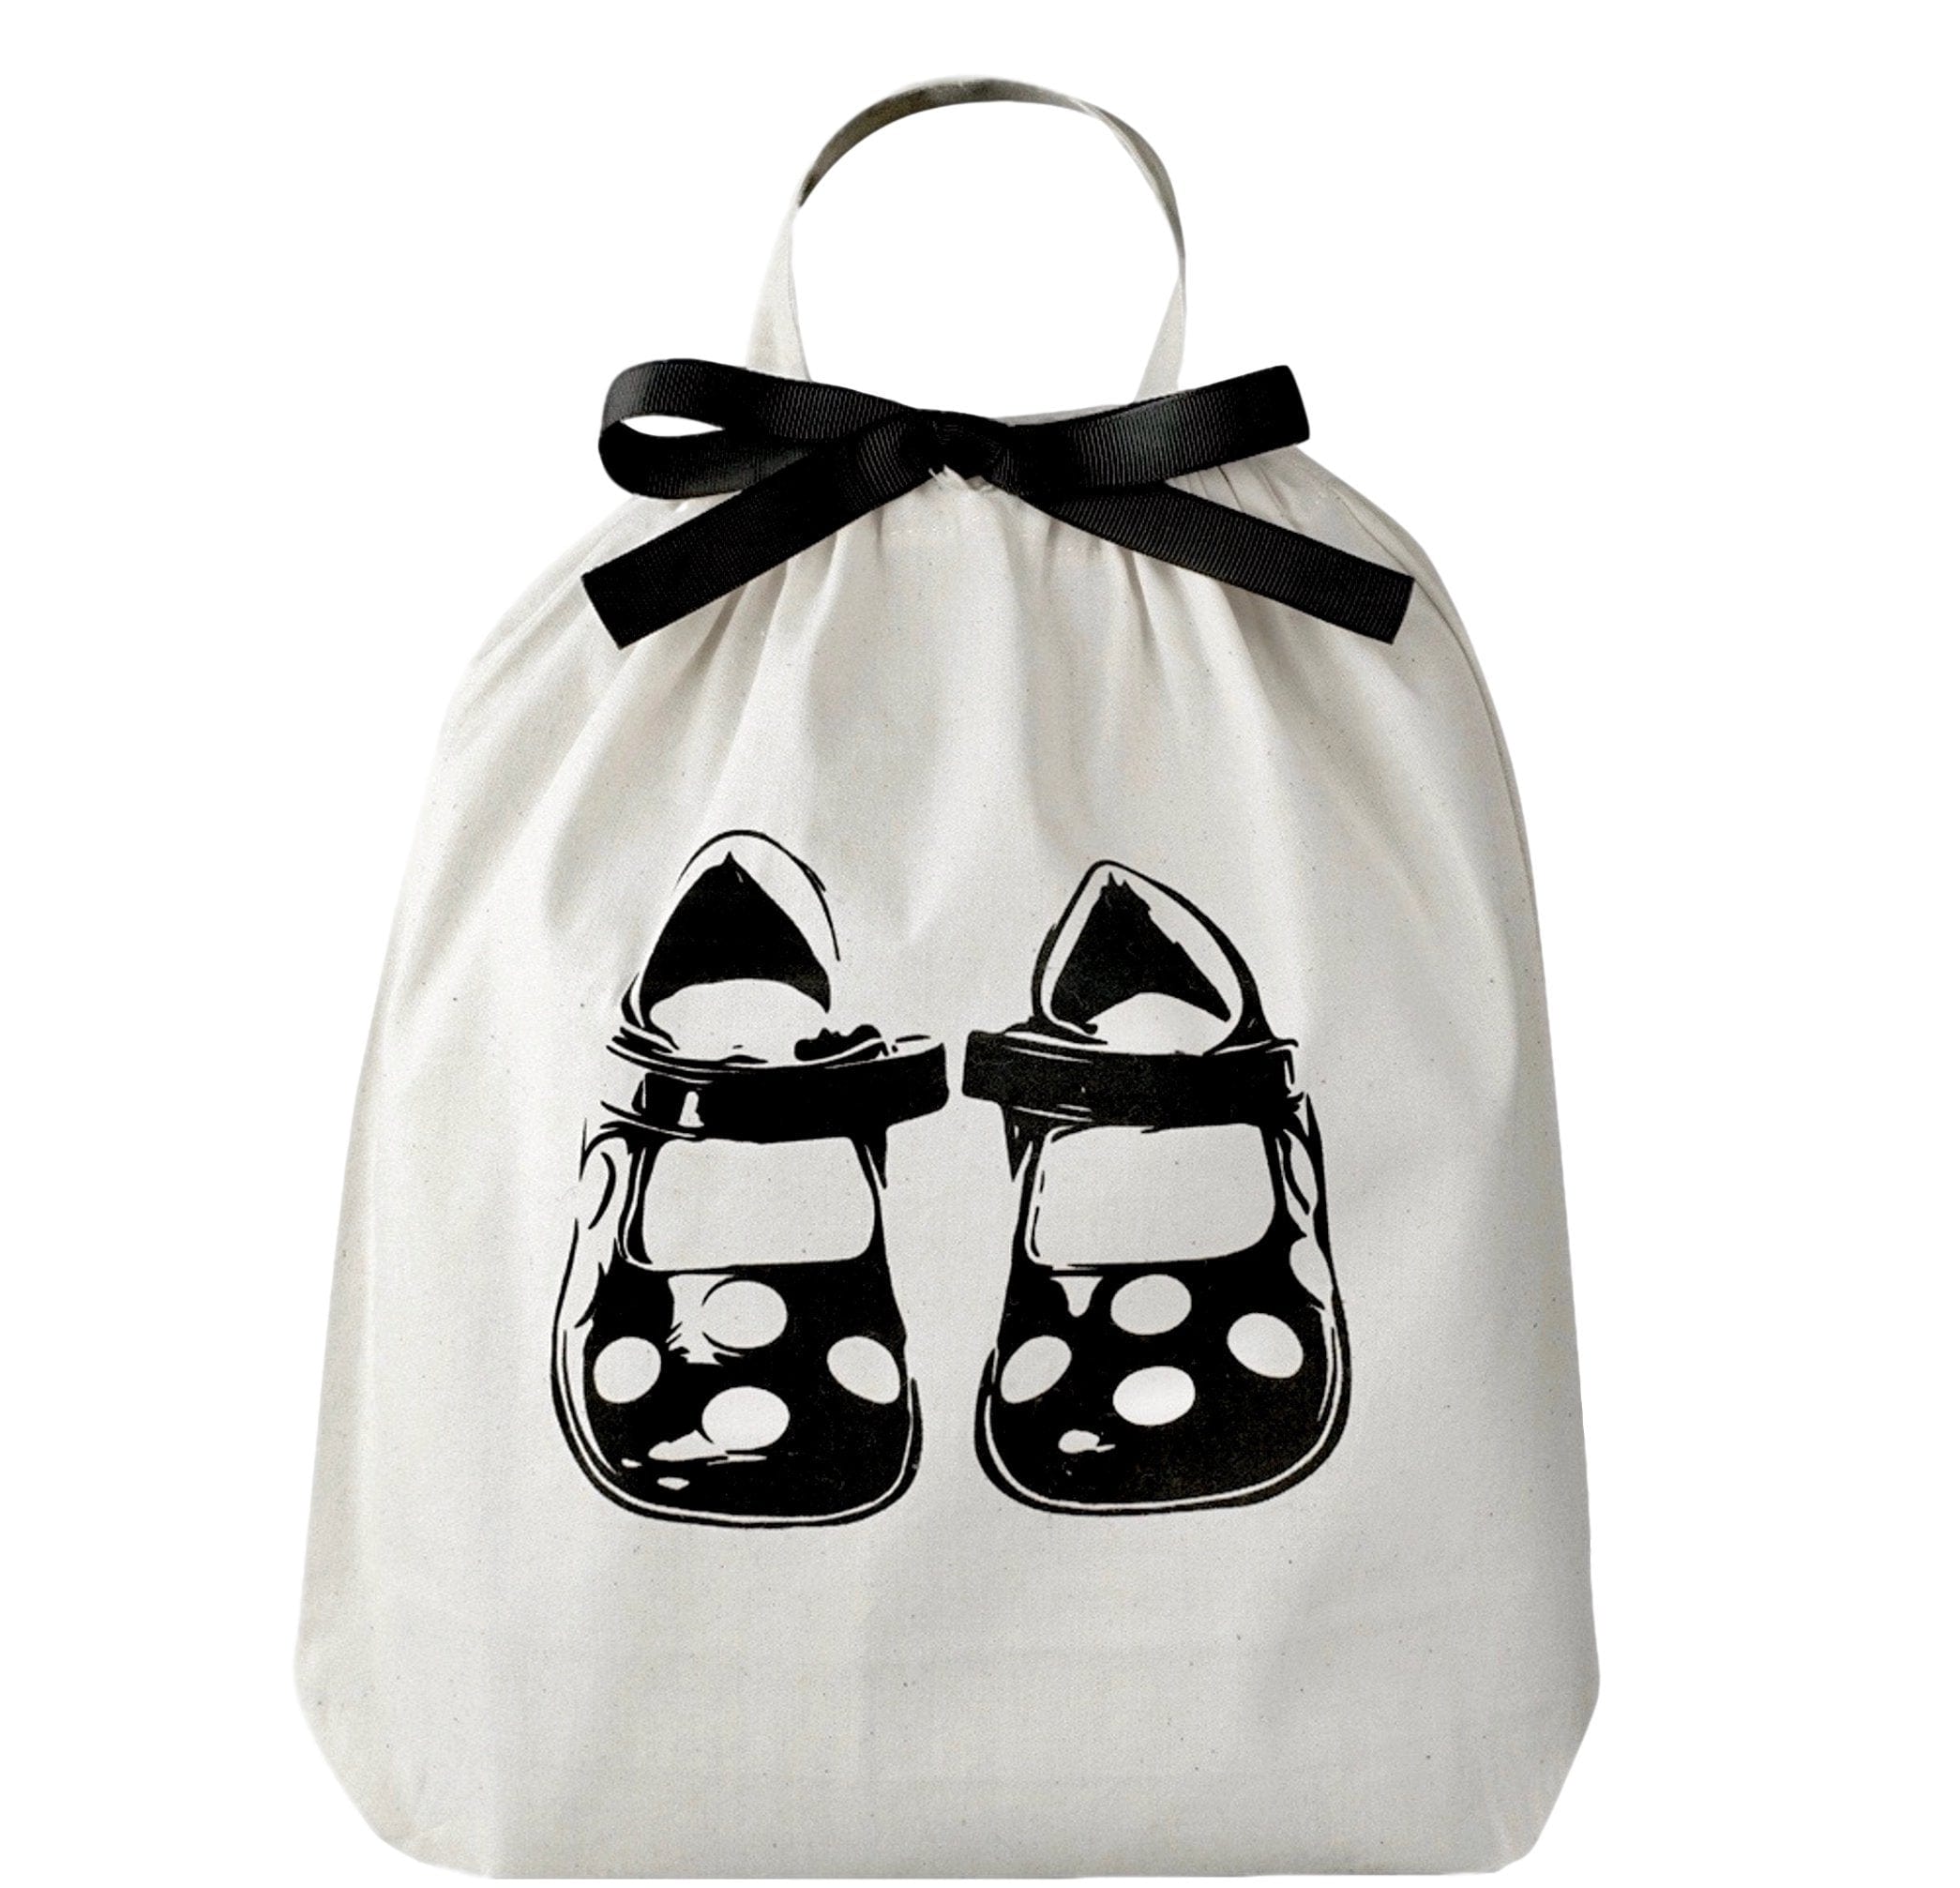 Children shoe bag with polkadot children shoes printed on the front. 